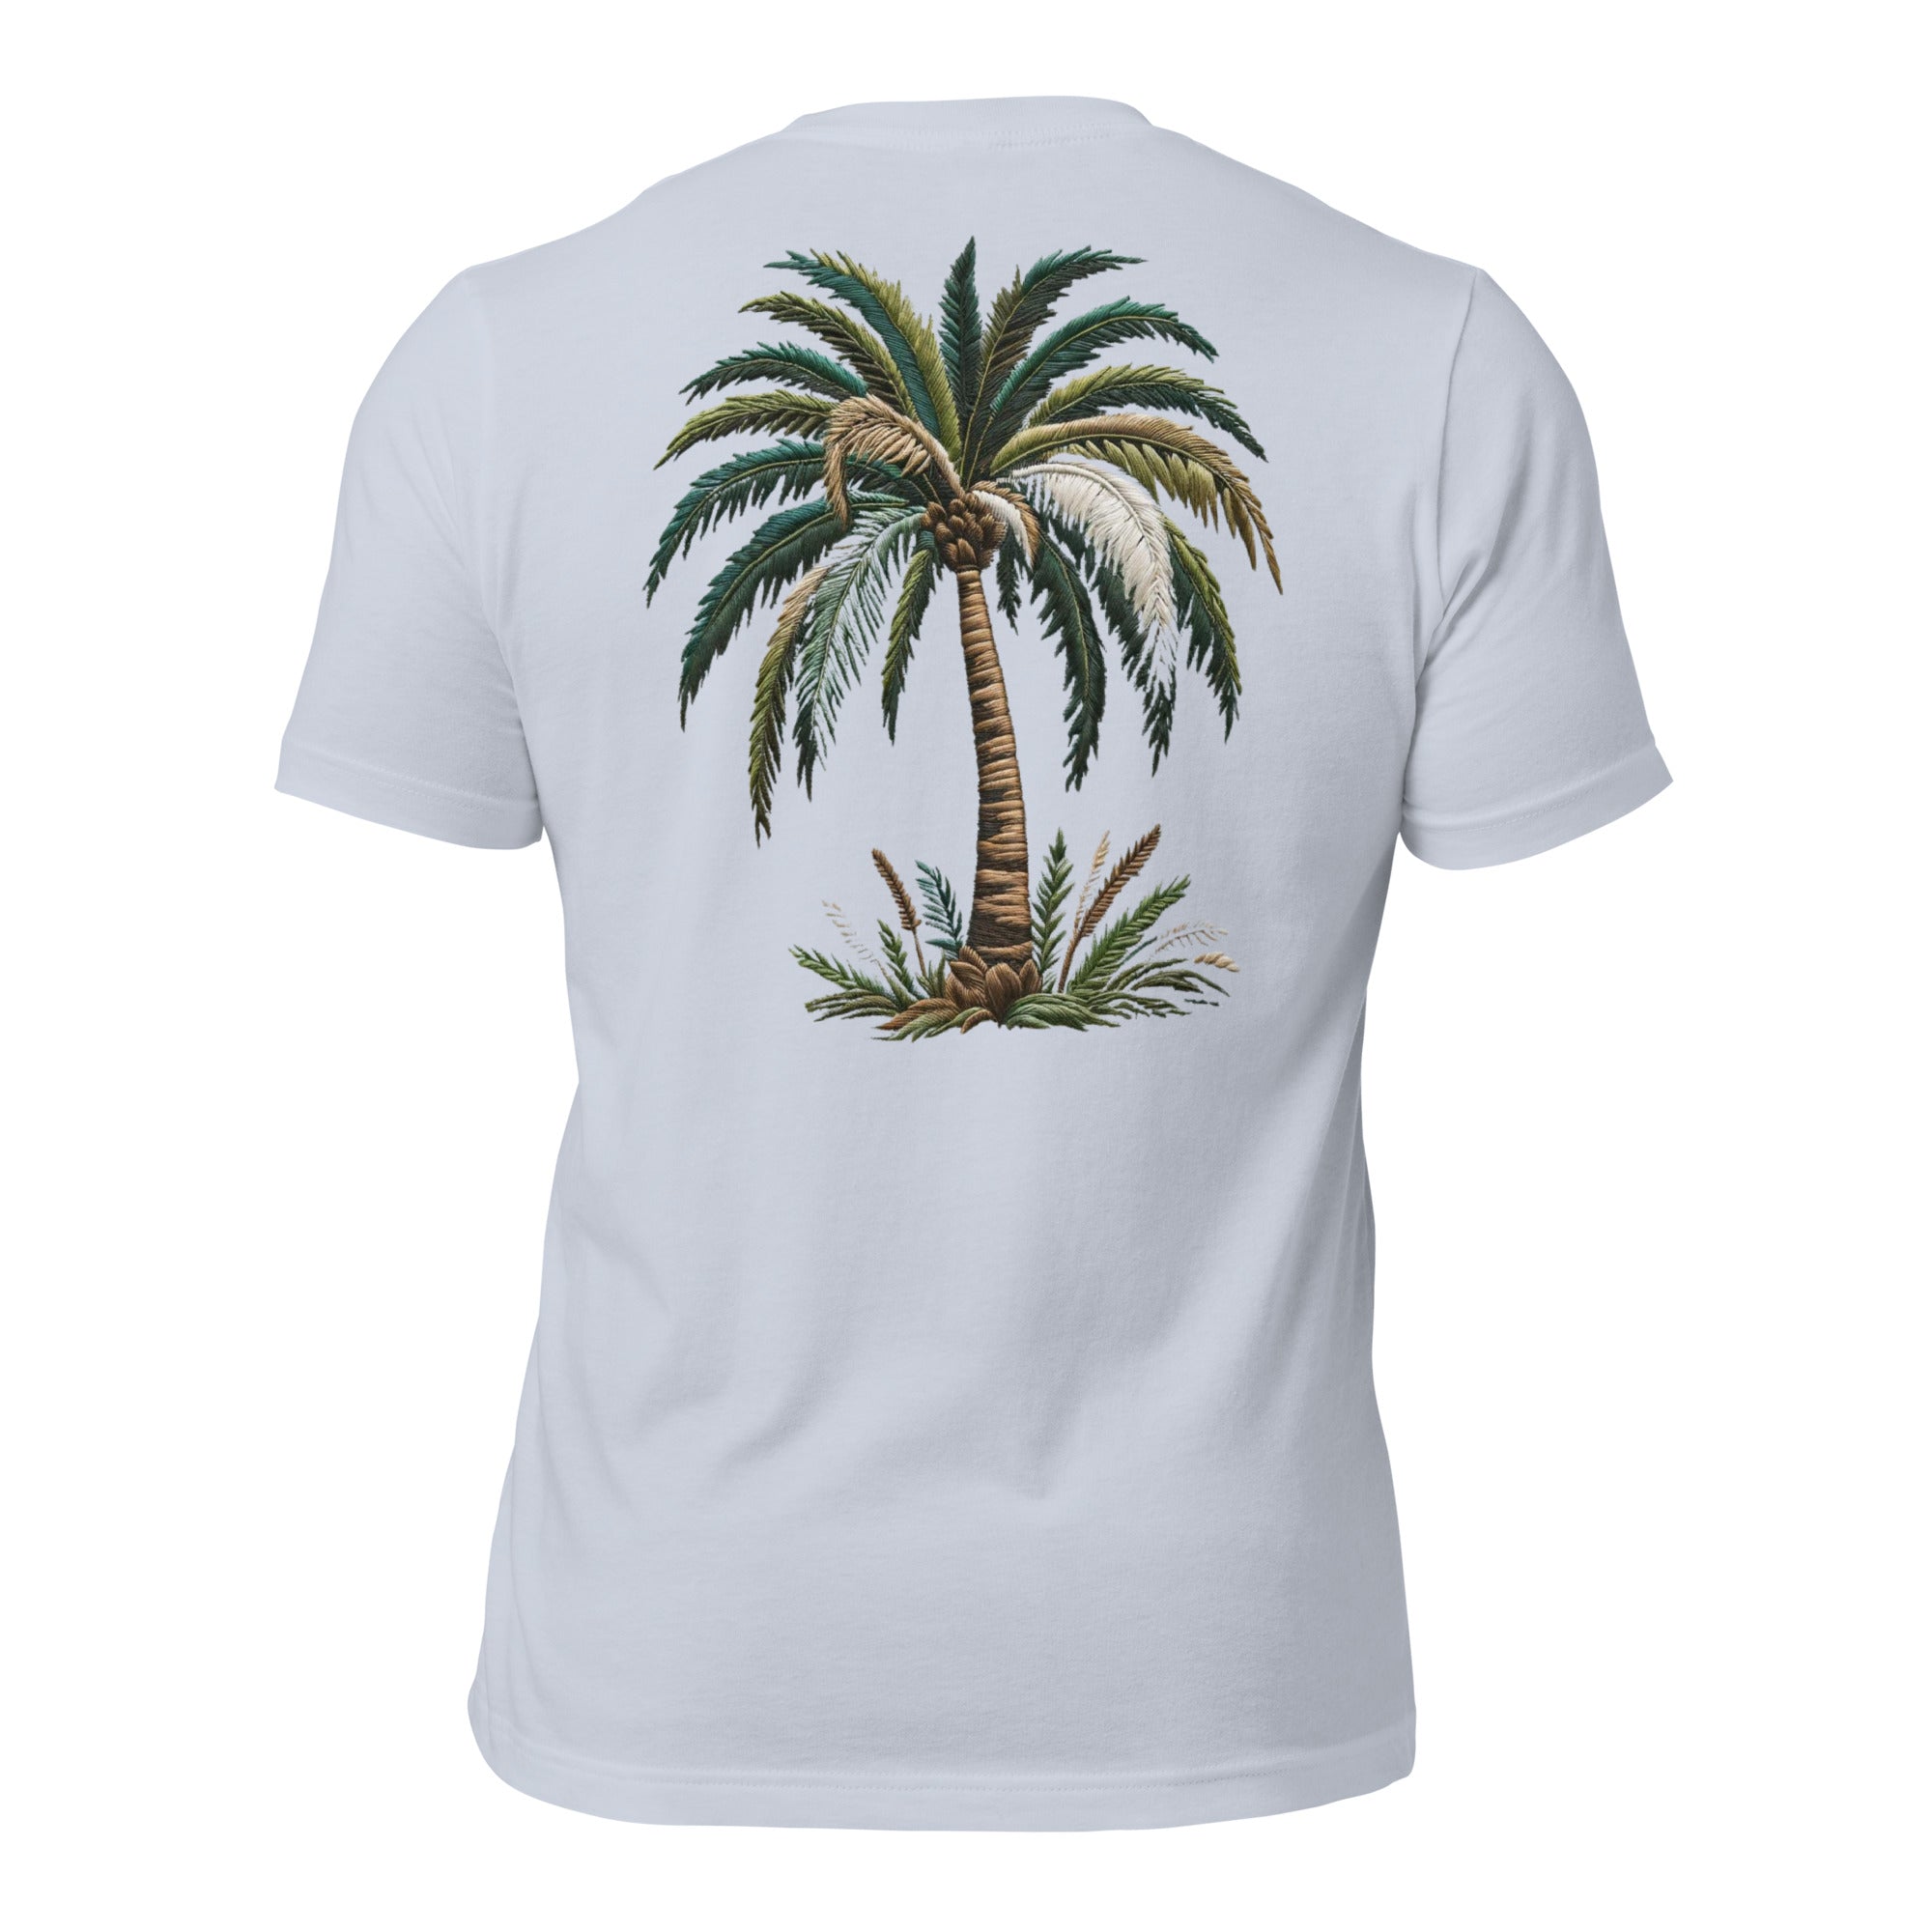 Sun-Kissed Style: Elevate Your Look with Lucas Islander's Palm Tree T-Shirt